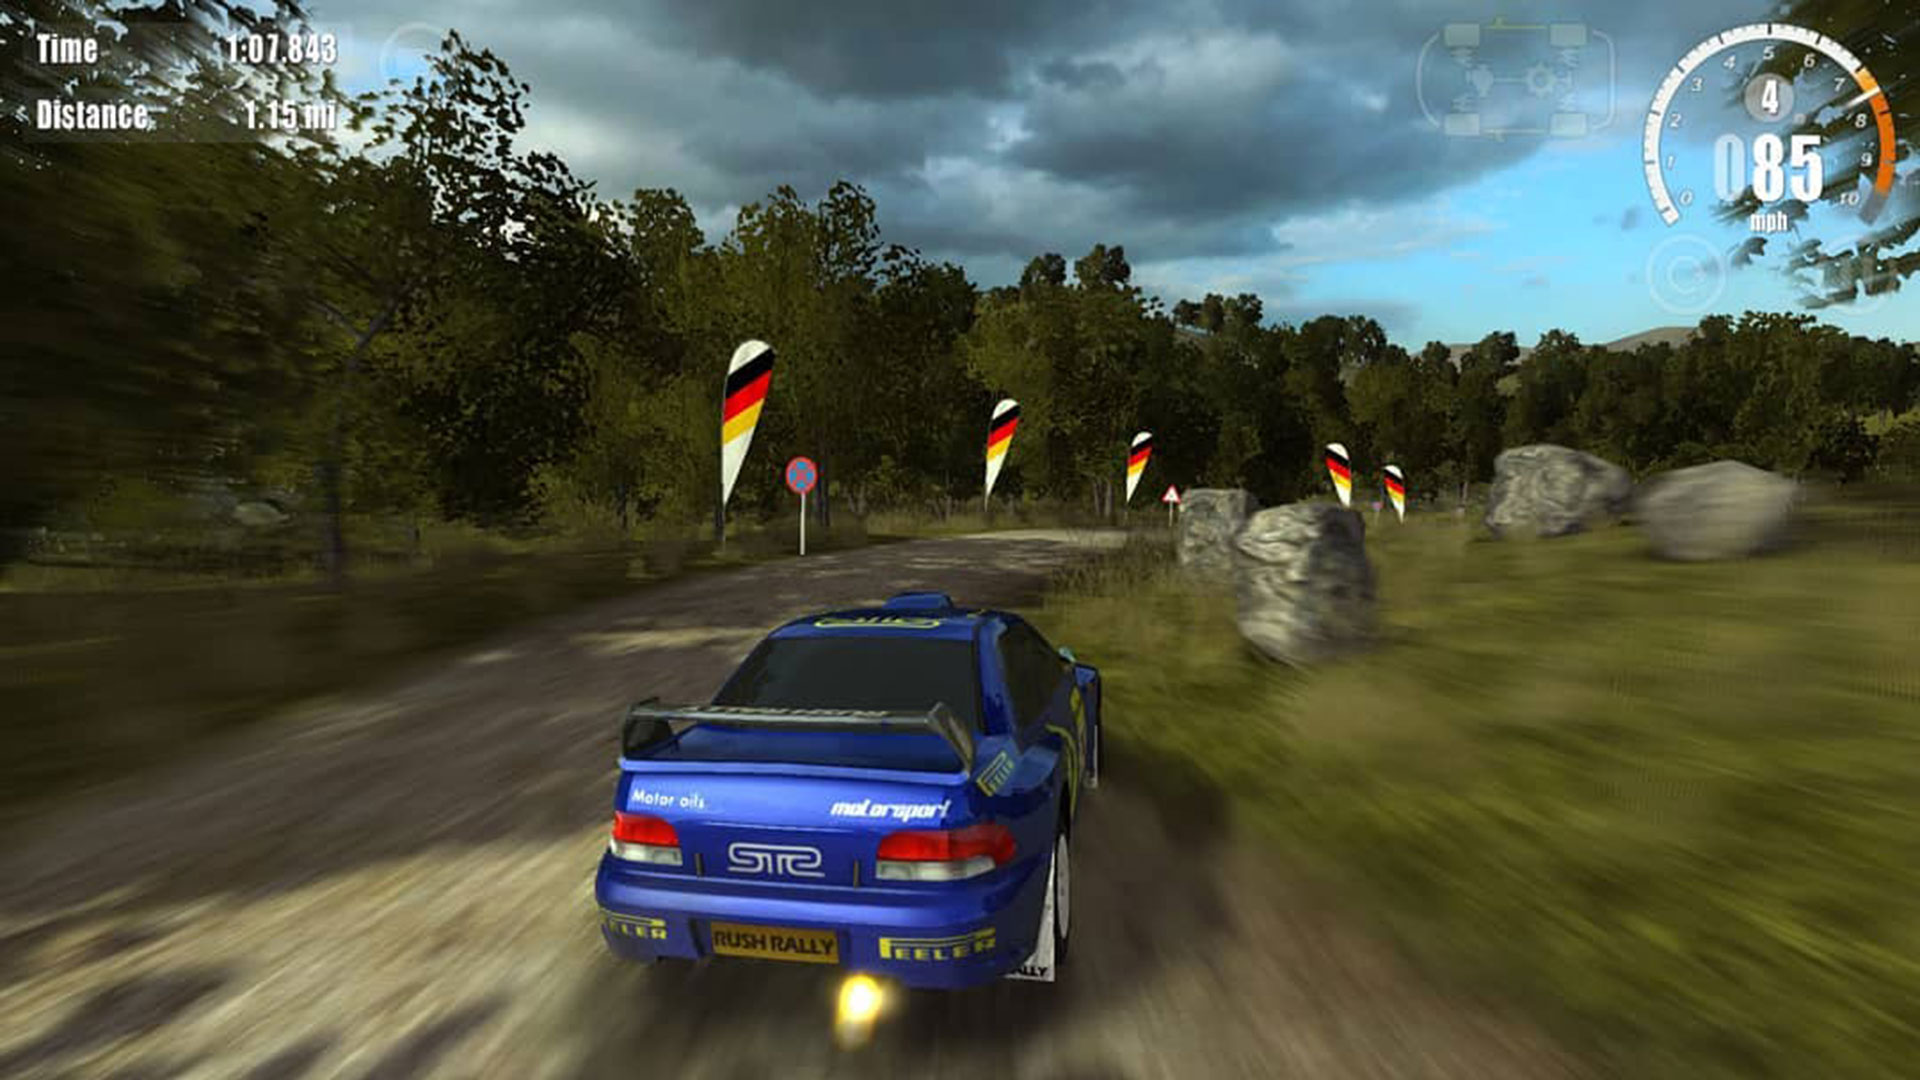 The Best 2020 Mobile Racing Games For Ios And Android Motoring